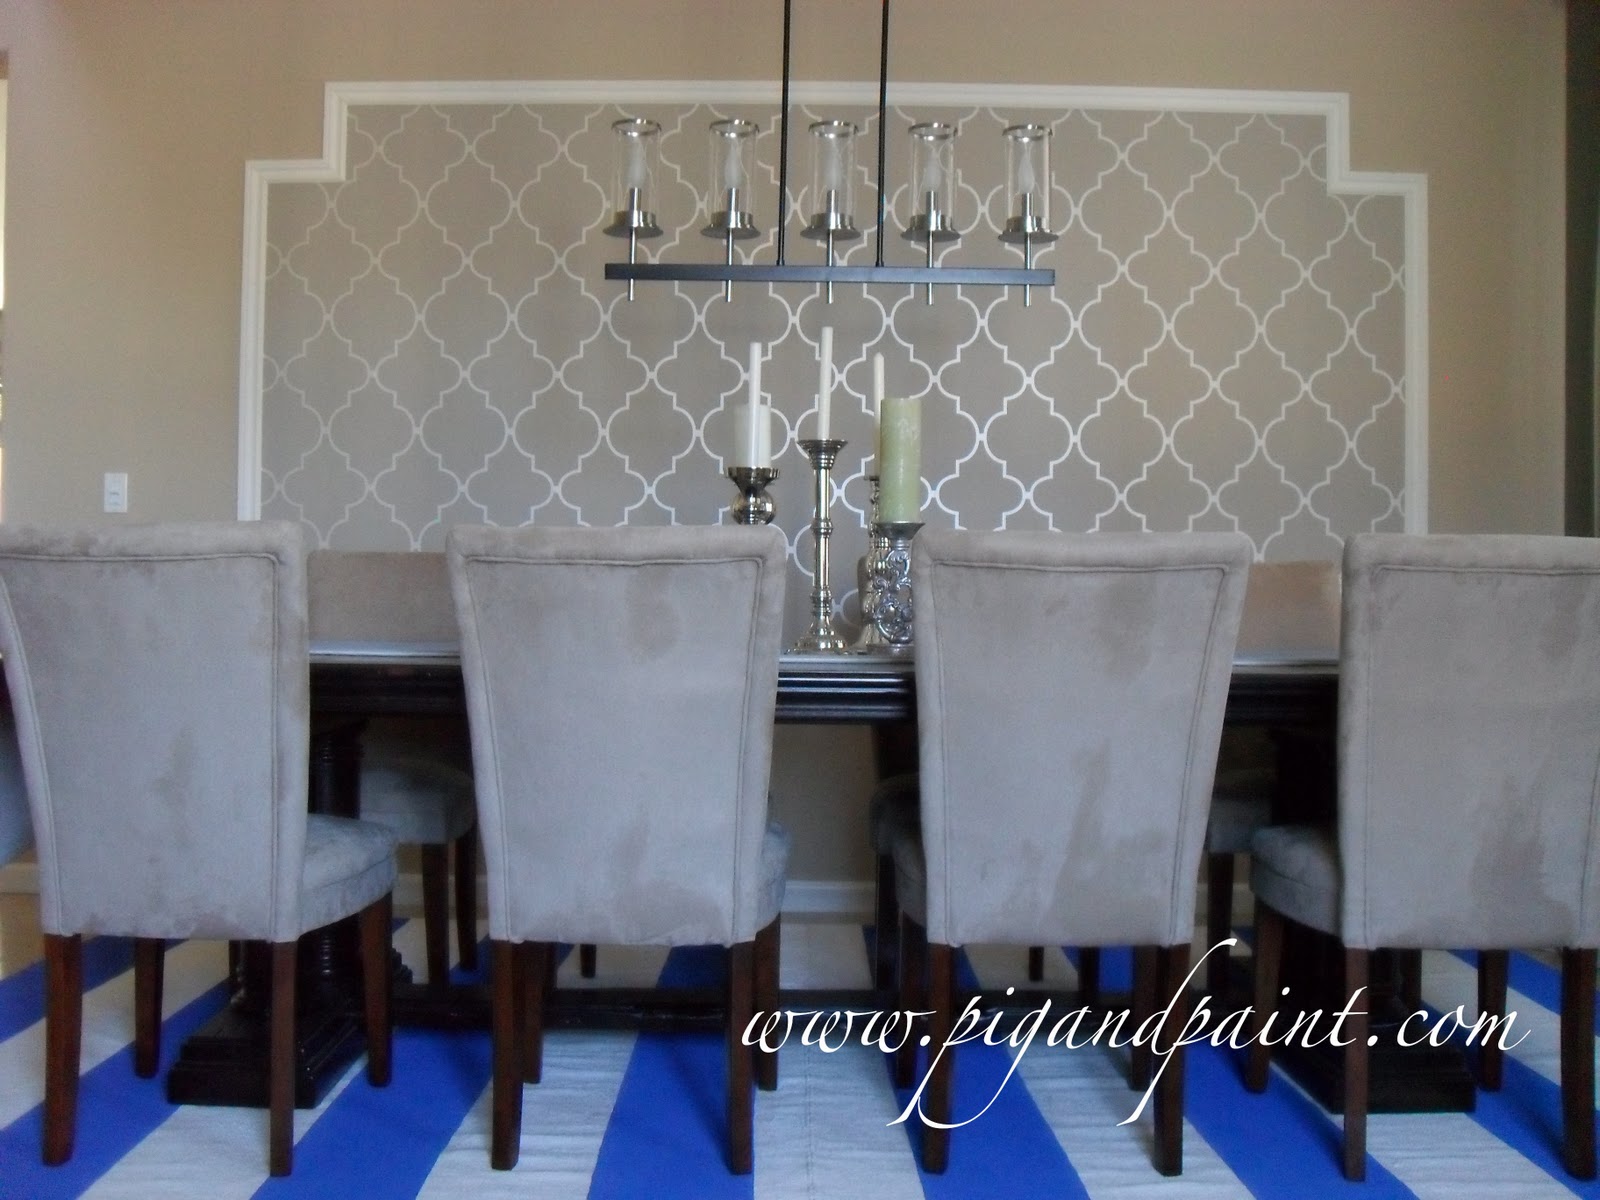 ... Paint: Create a Feature Wall with Framed Wallpaper (and Wall Liner